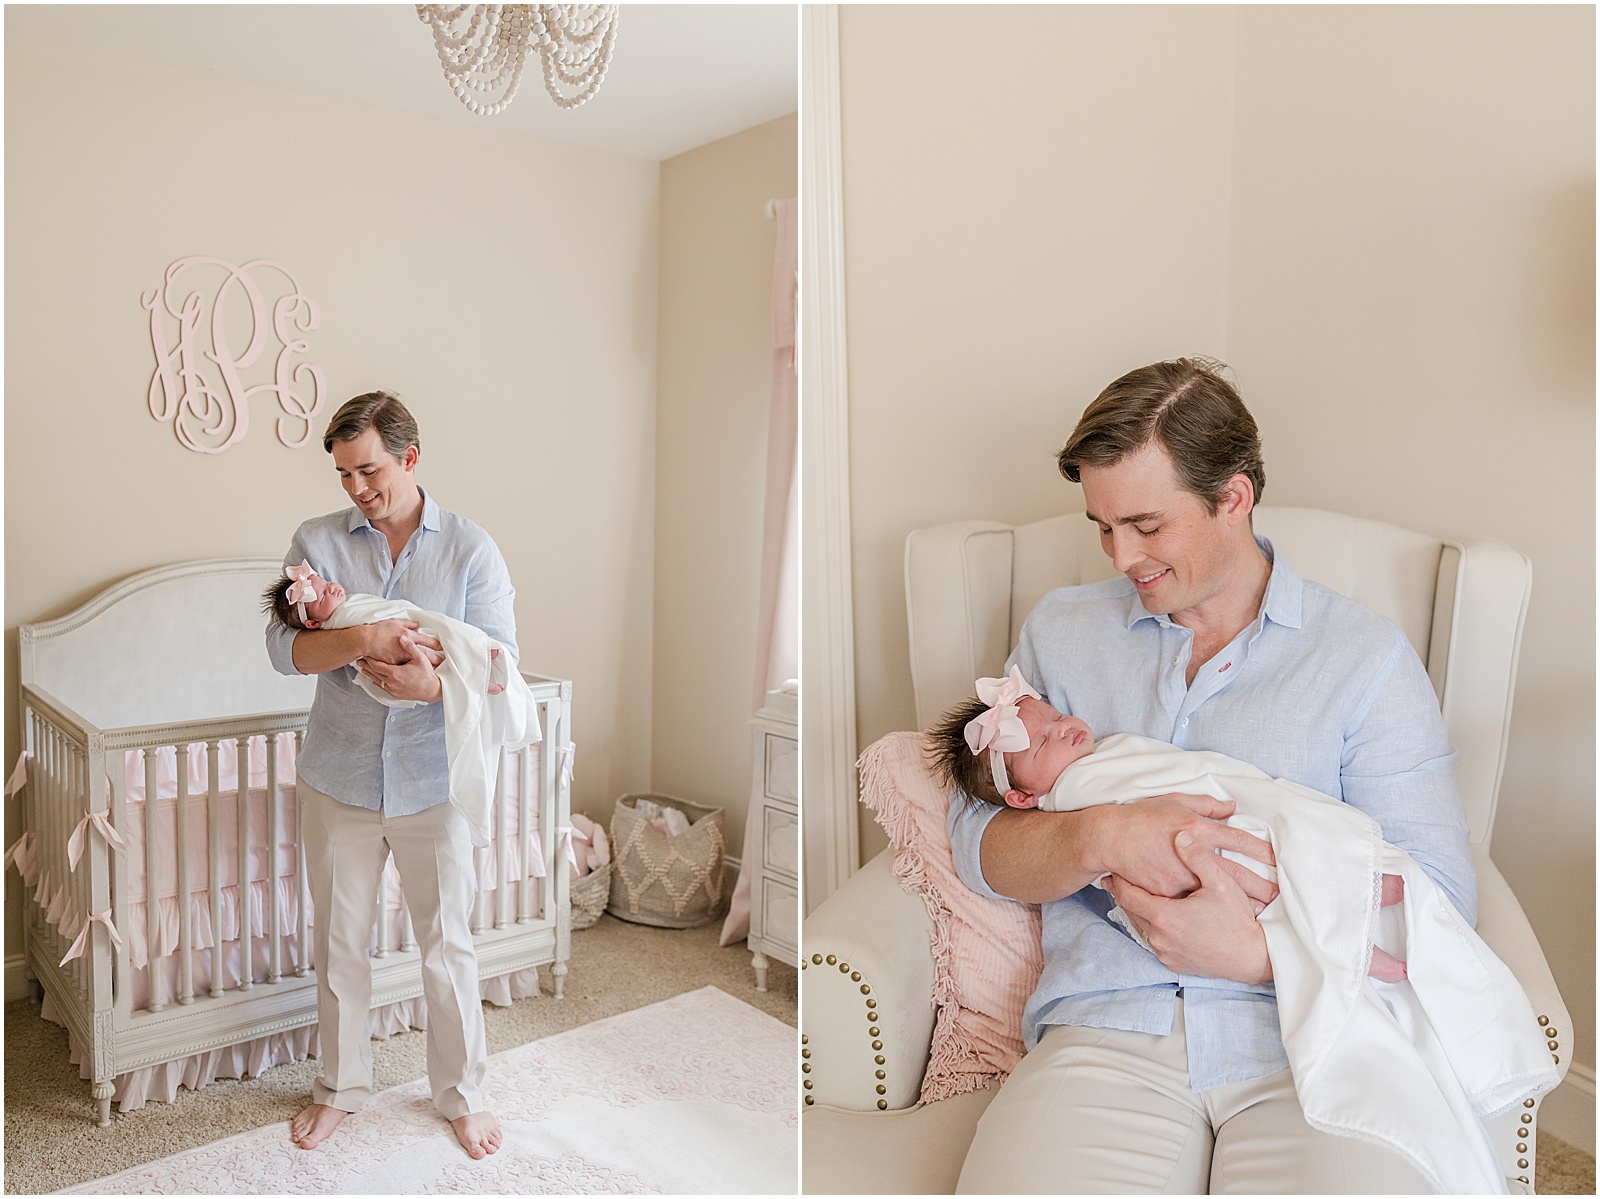 Photos of father holding his newborn daughter by Greenville photographer Molly Hensley